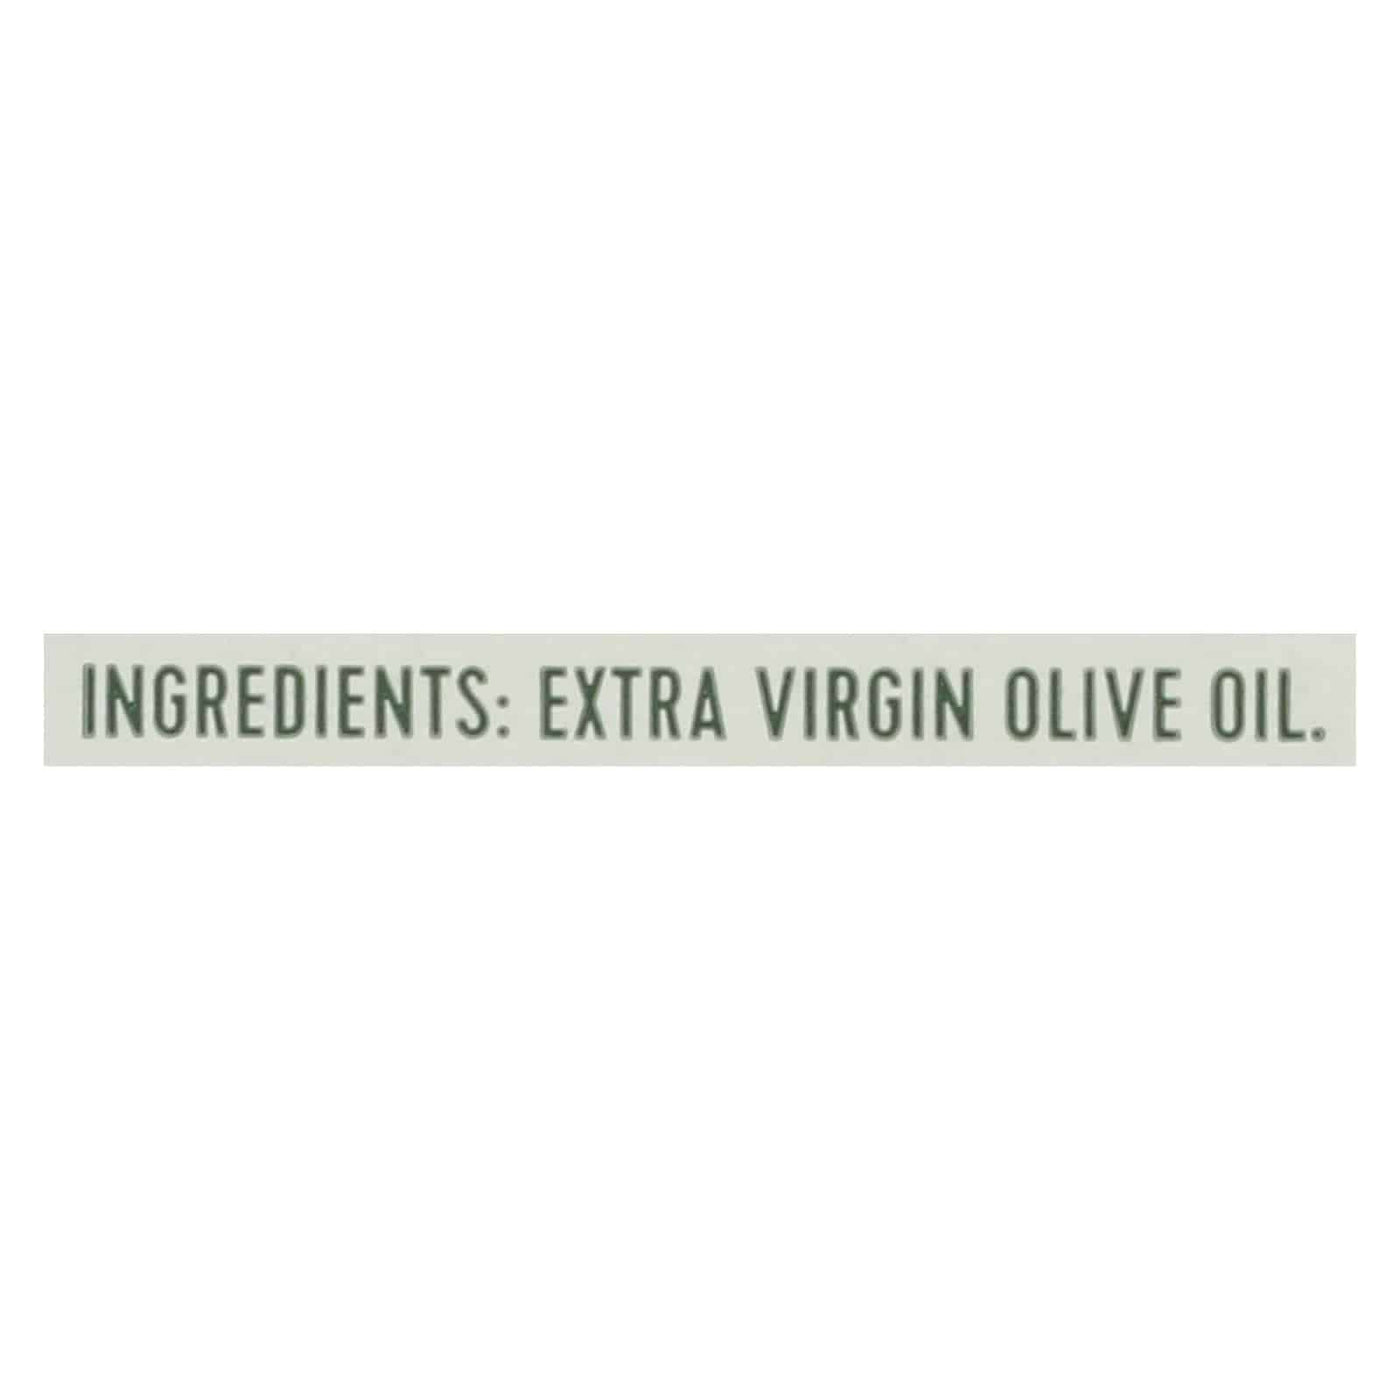 California Olive Ranch Extra Virgin Olive Oil - Everyday - Case Of 6 - 25.4 Oz. | OnlyNaturals.us